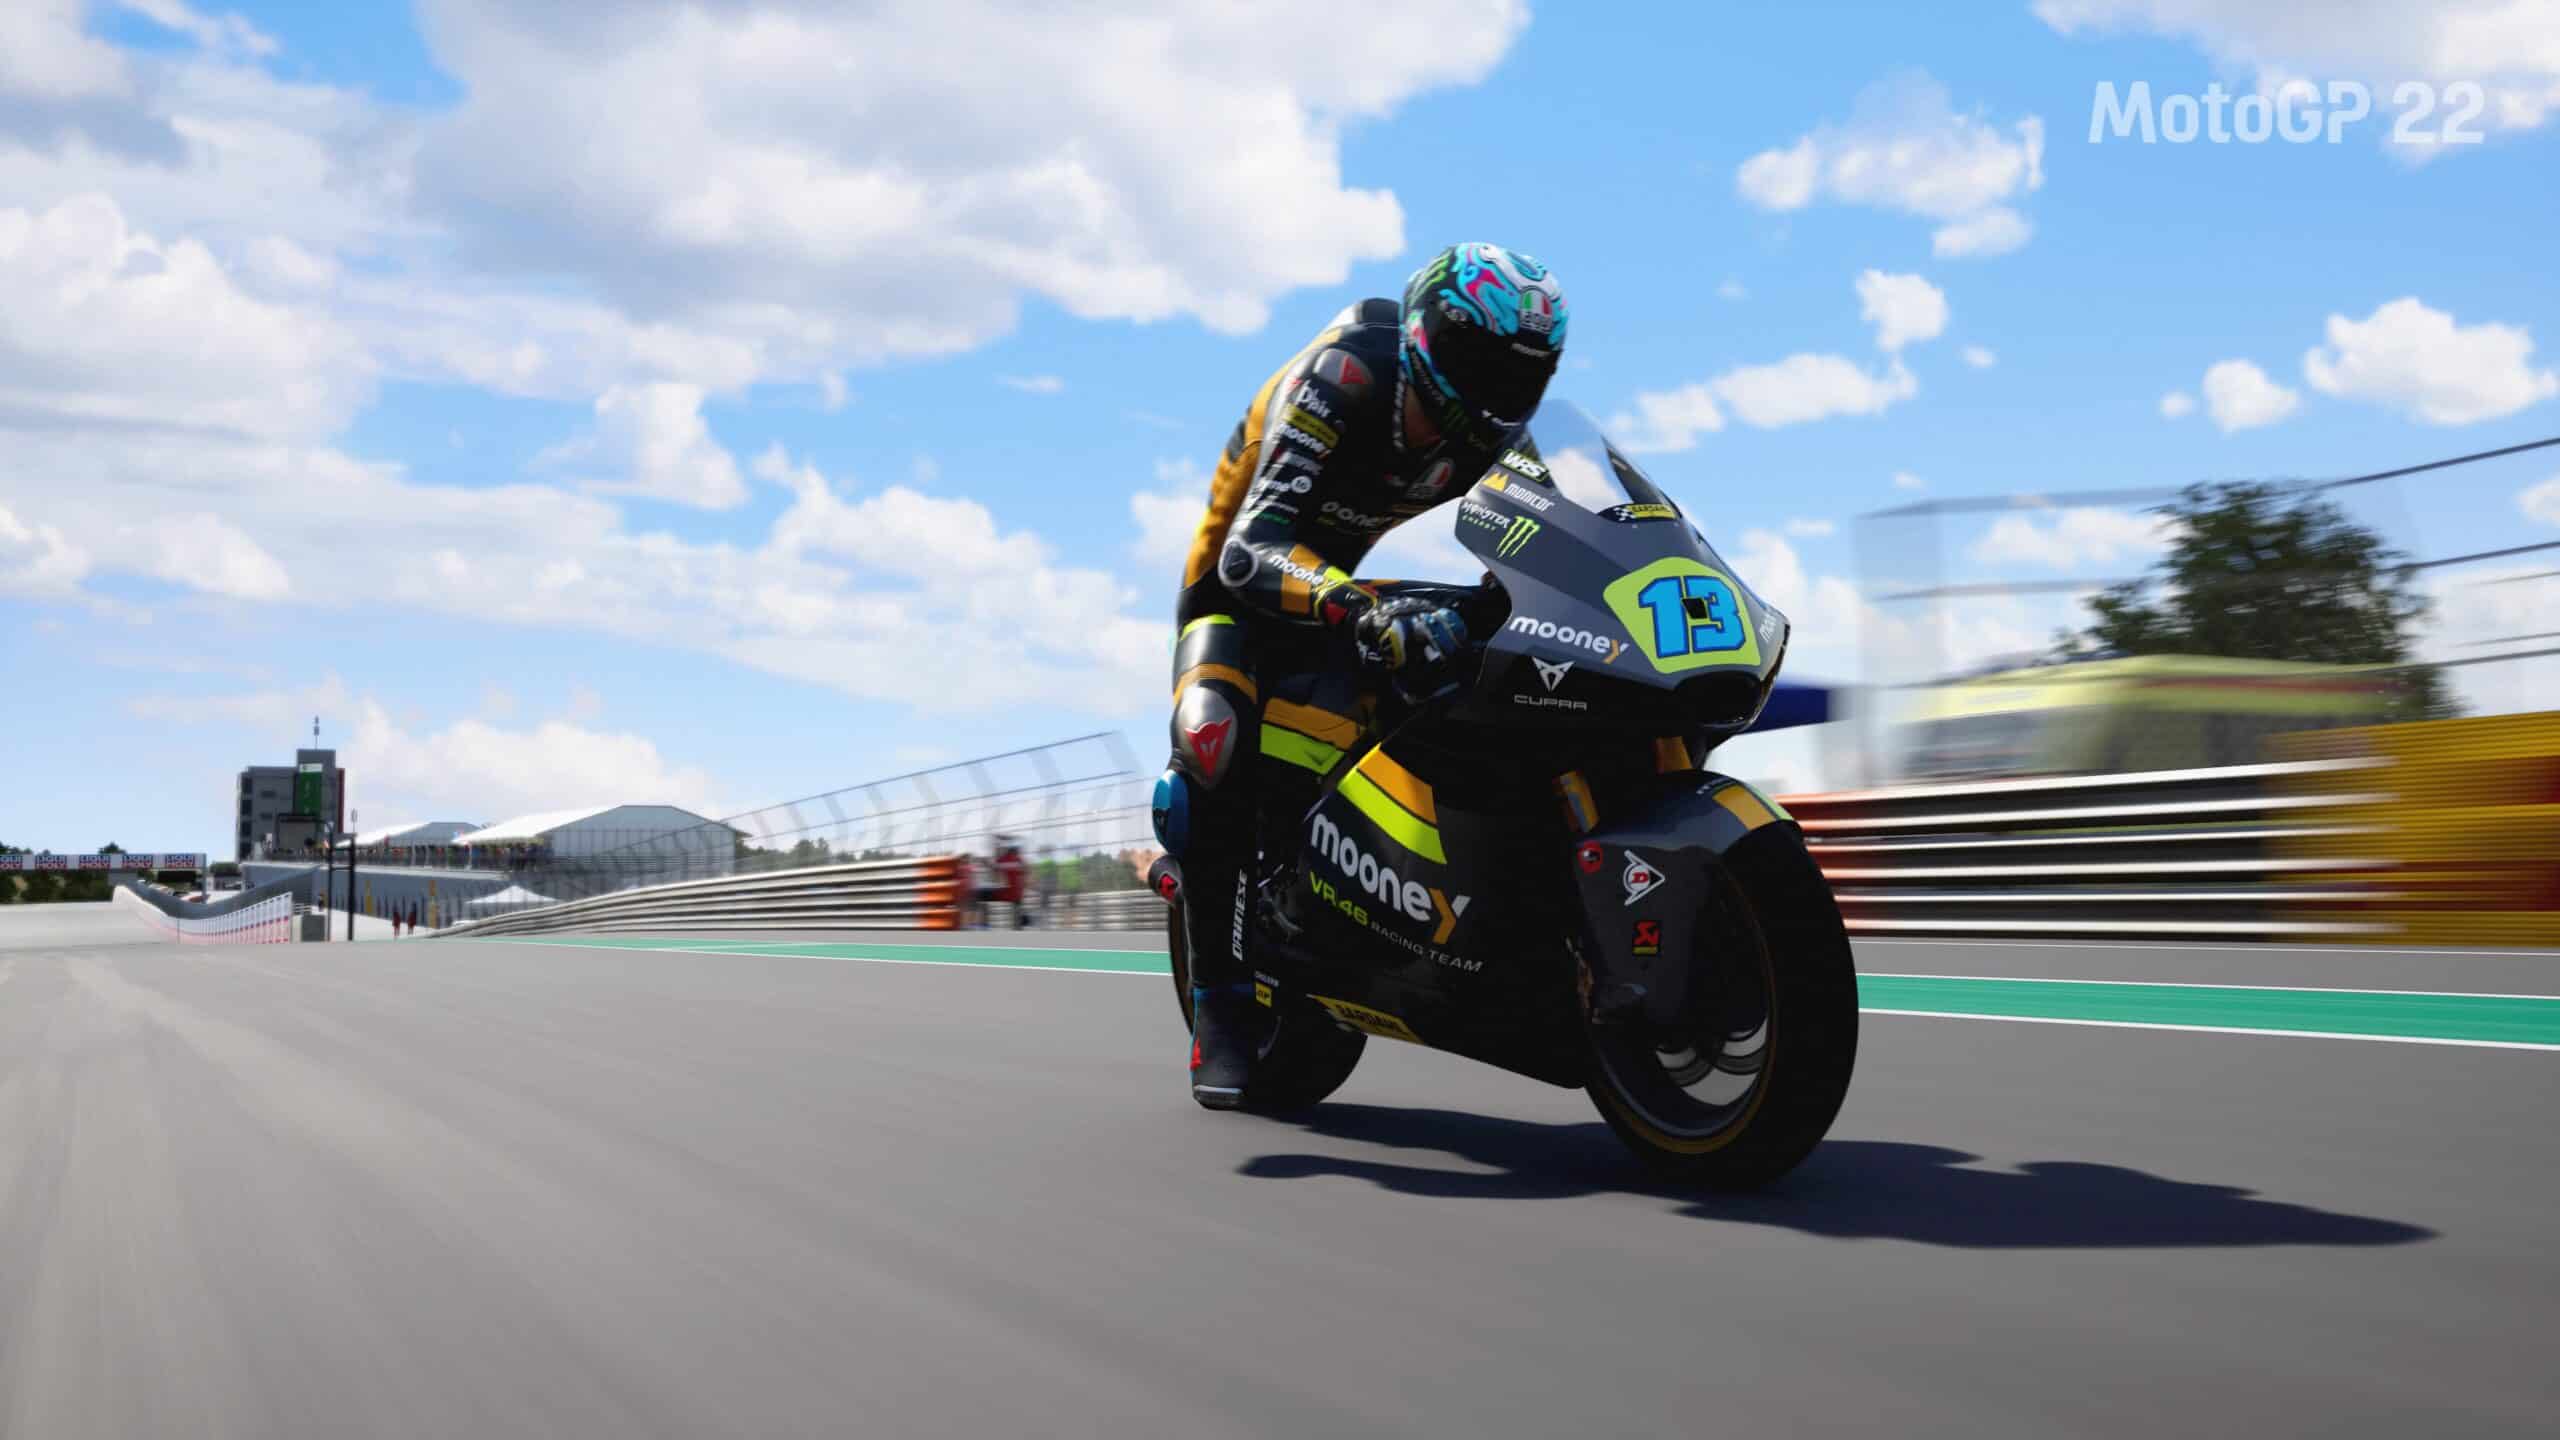 MotoGP 22 game update brings latest Moto2 roster and PC version in line